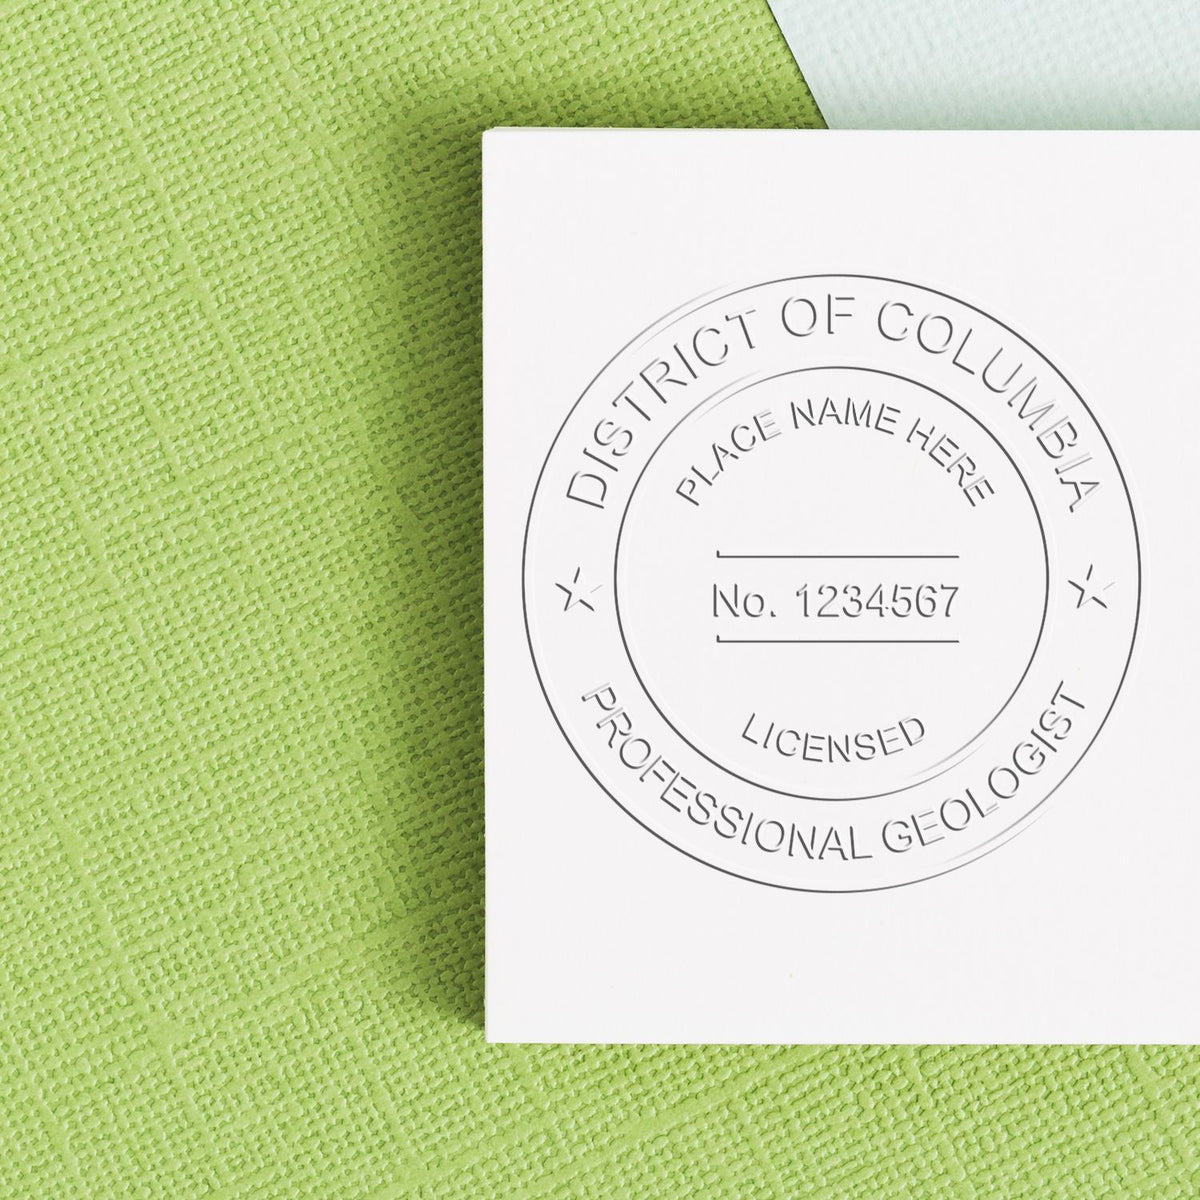 This paper is stamped with a sample imprint of the Long Reach District of Columbia Geology Seal, signifying its quality and reliability.